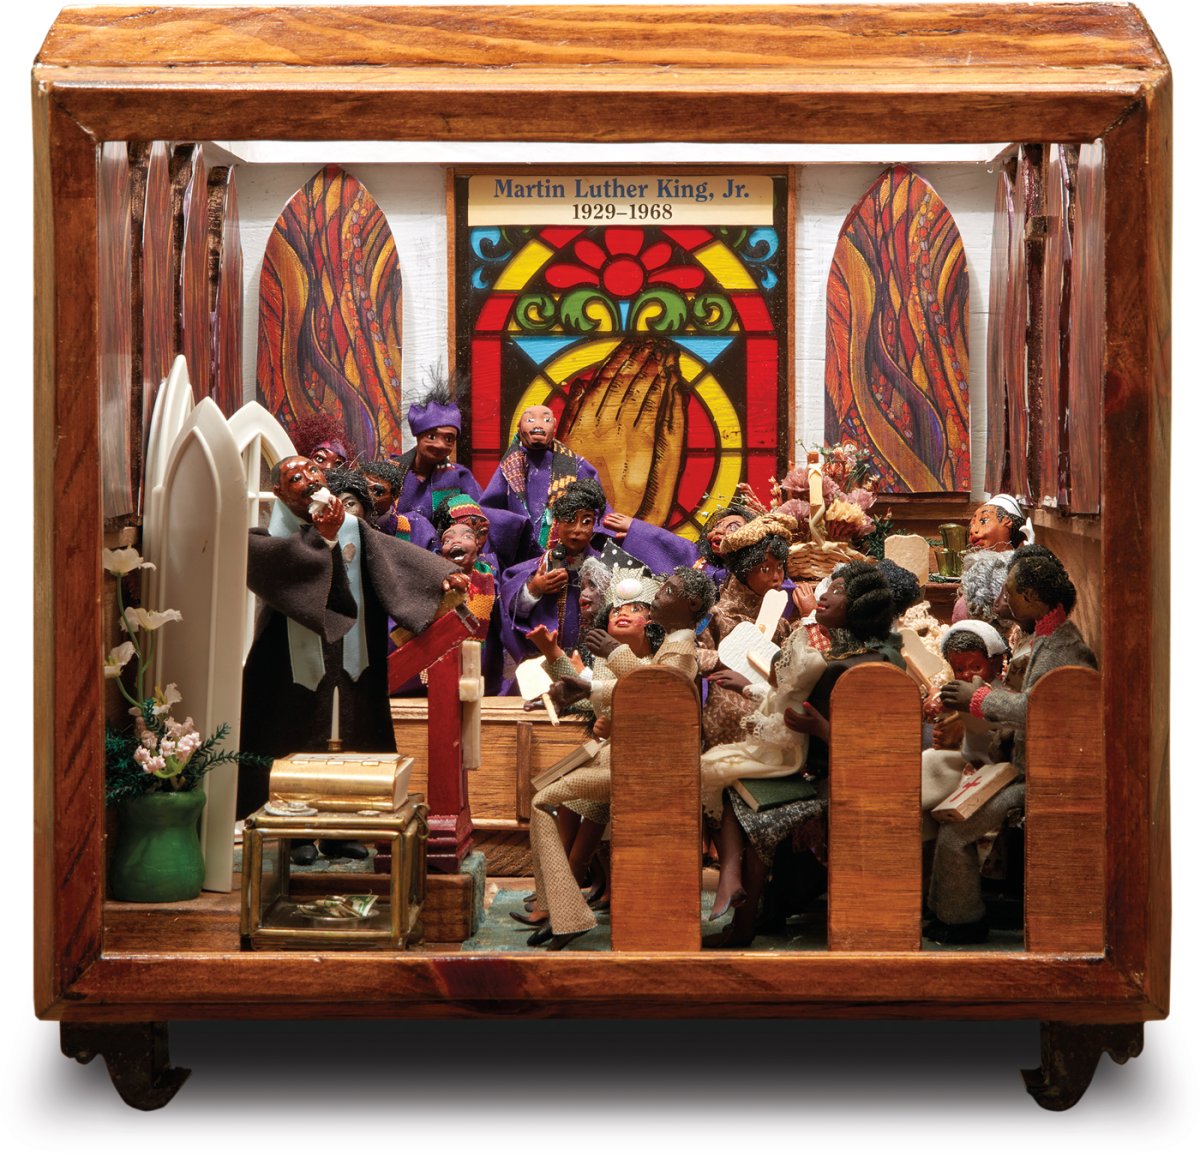 Diorama of Martin Luther King preaching in a church.